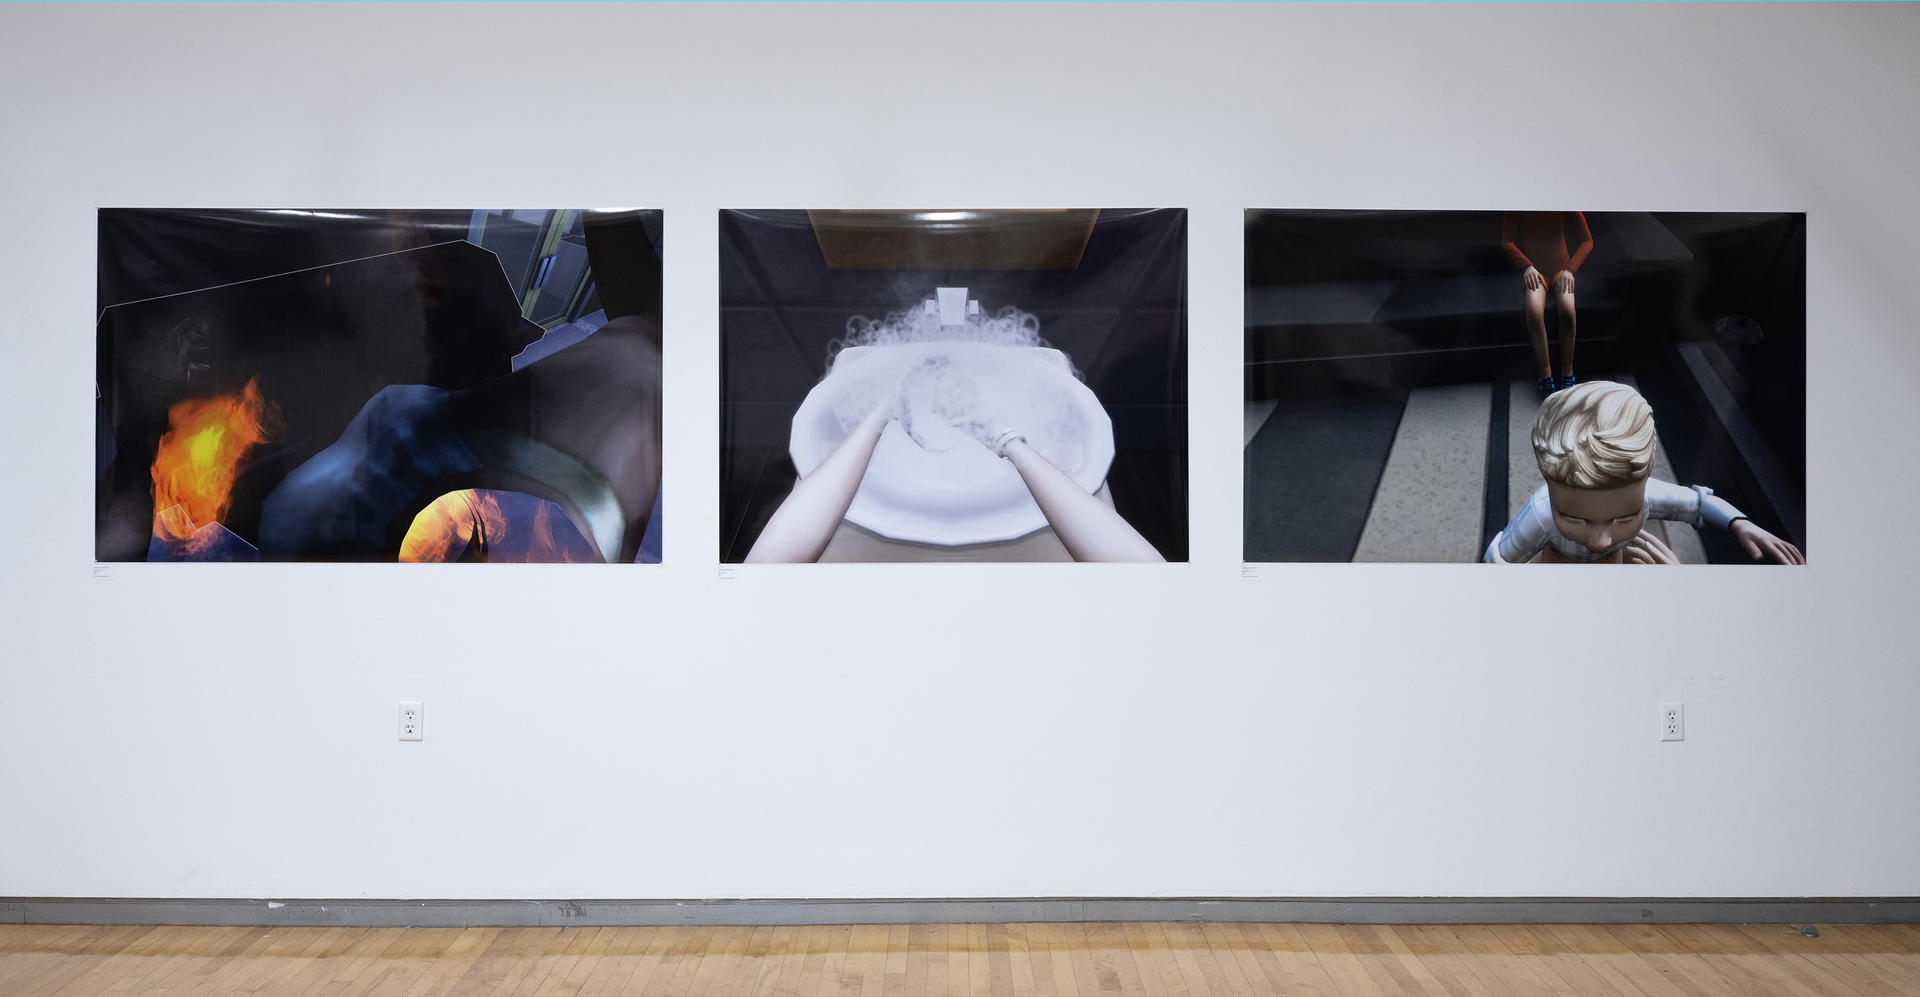 A series of large prints featuring life-sized digital avatars in a suburban environment from a first person perspective